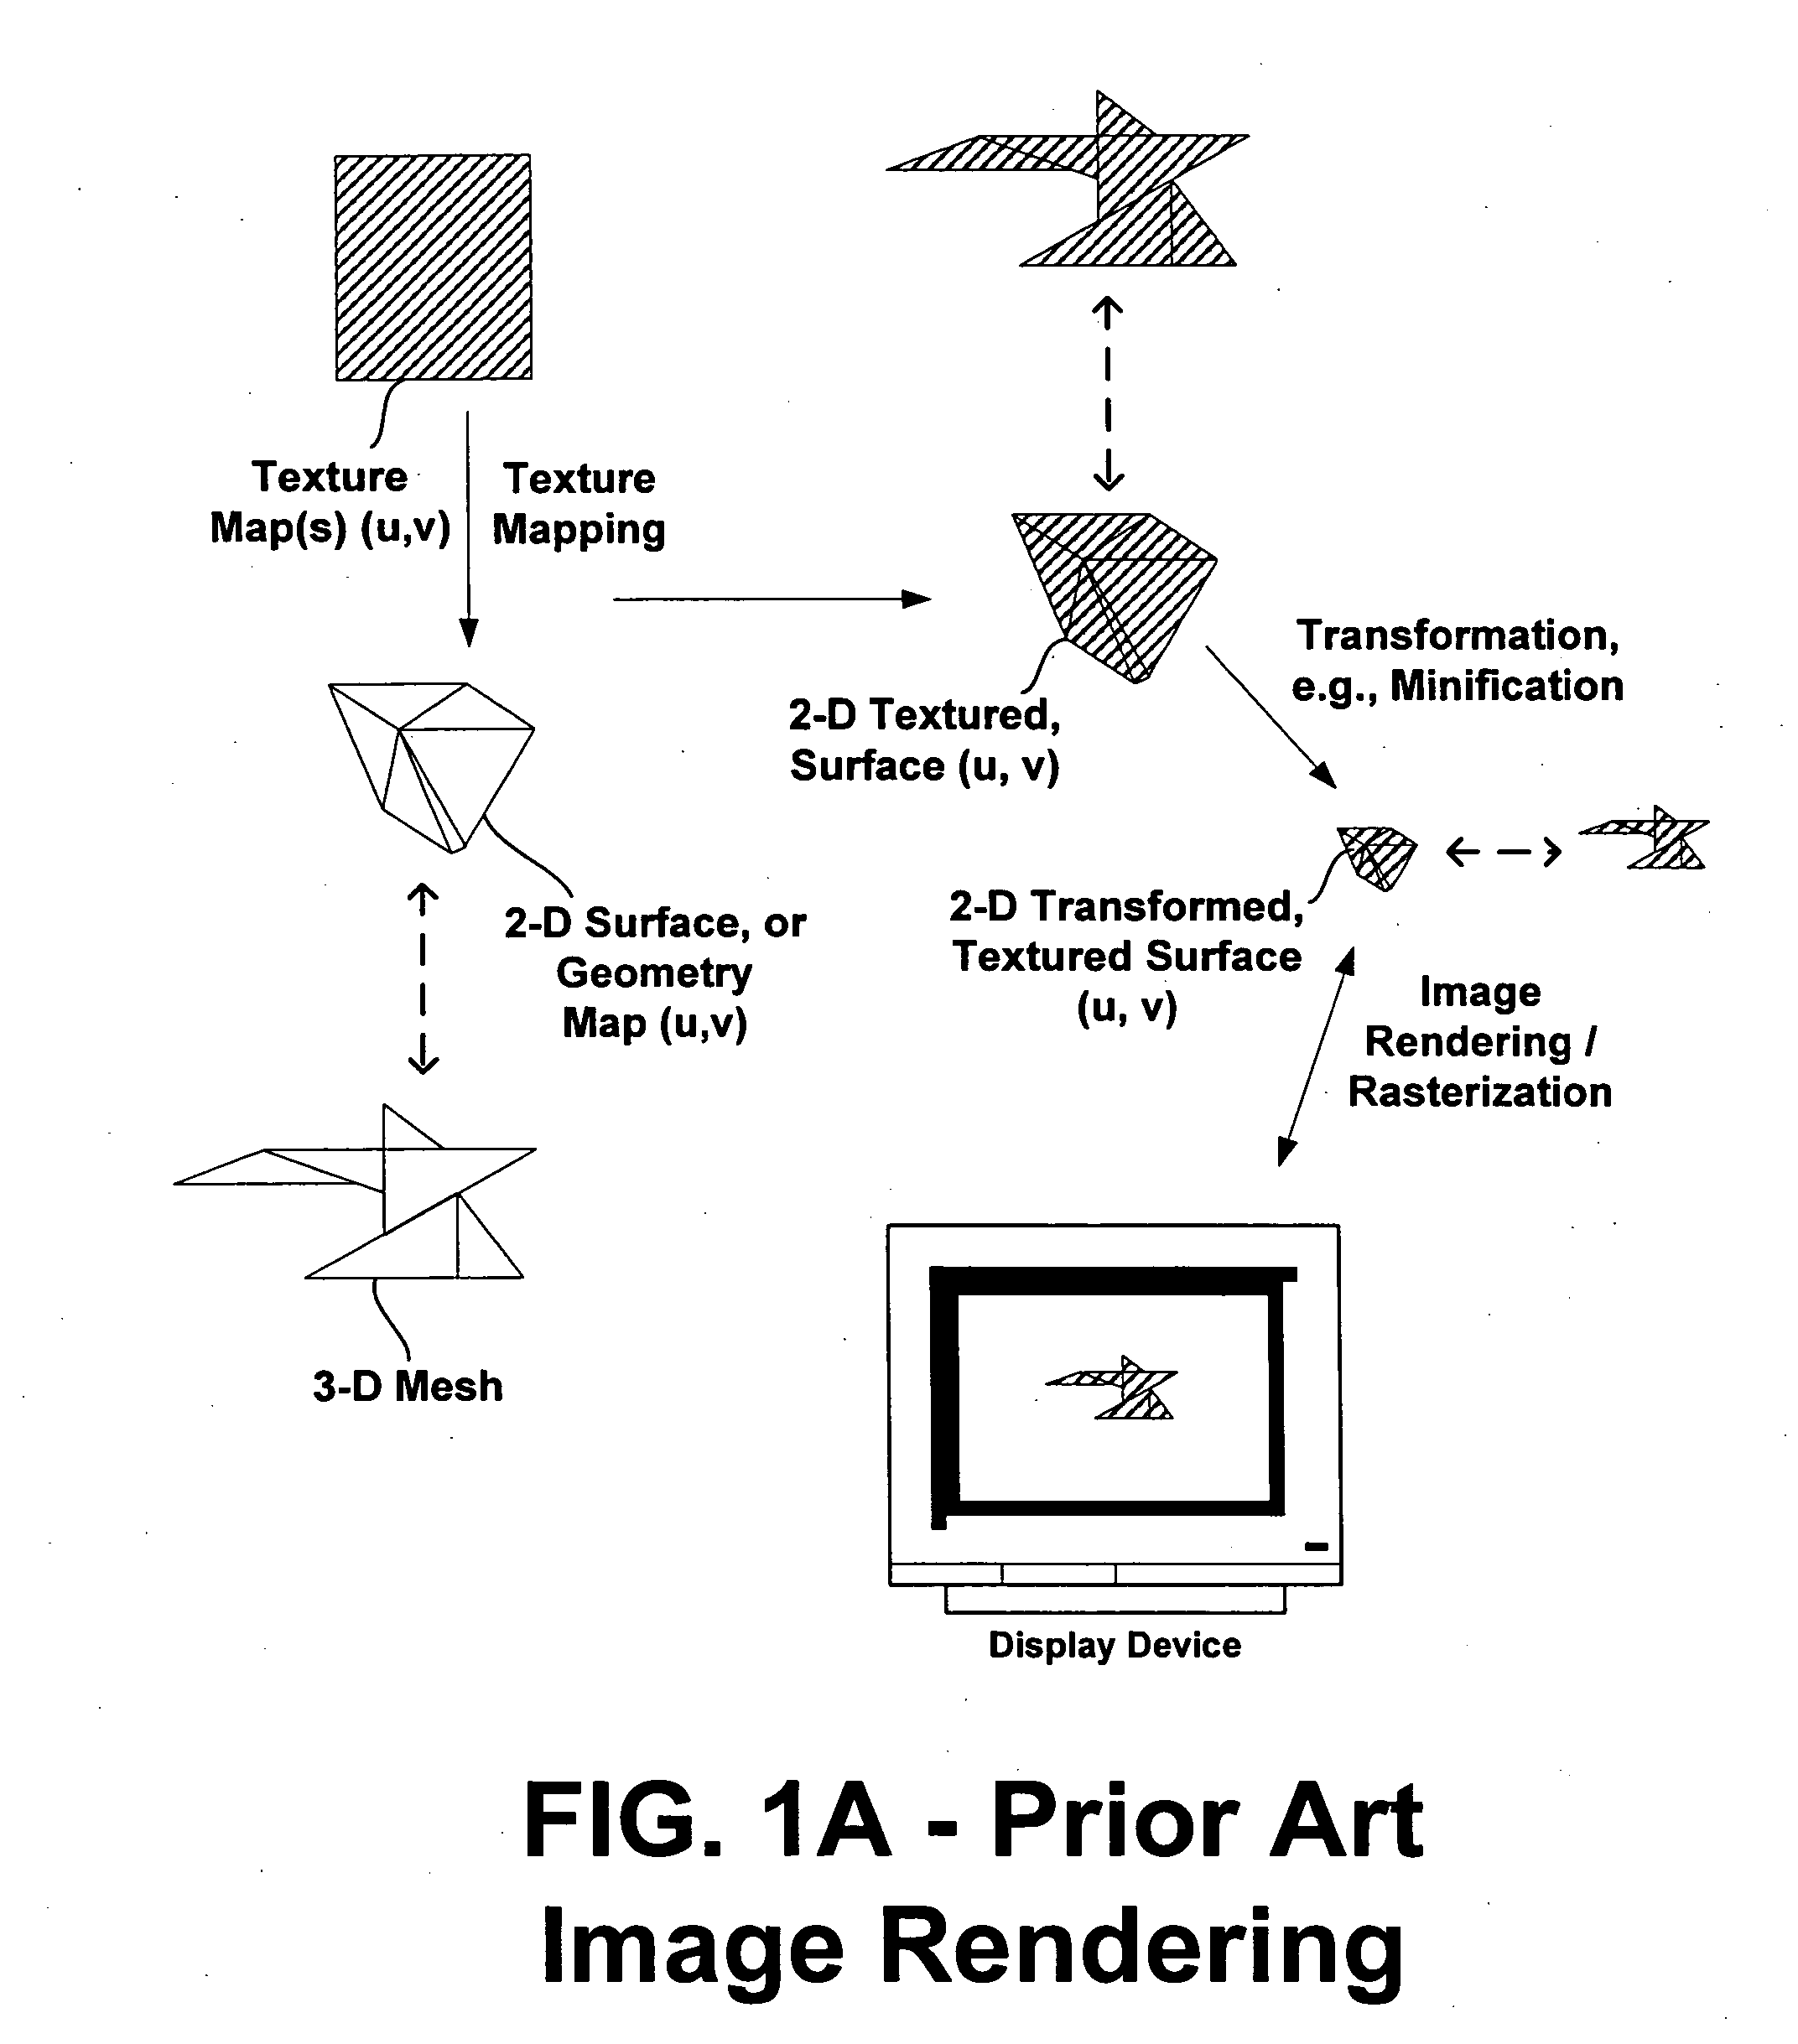 Systems and methods for providing image rendering using variable rate source sampling